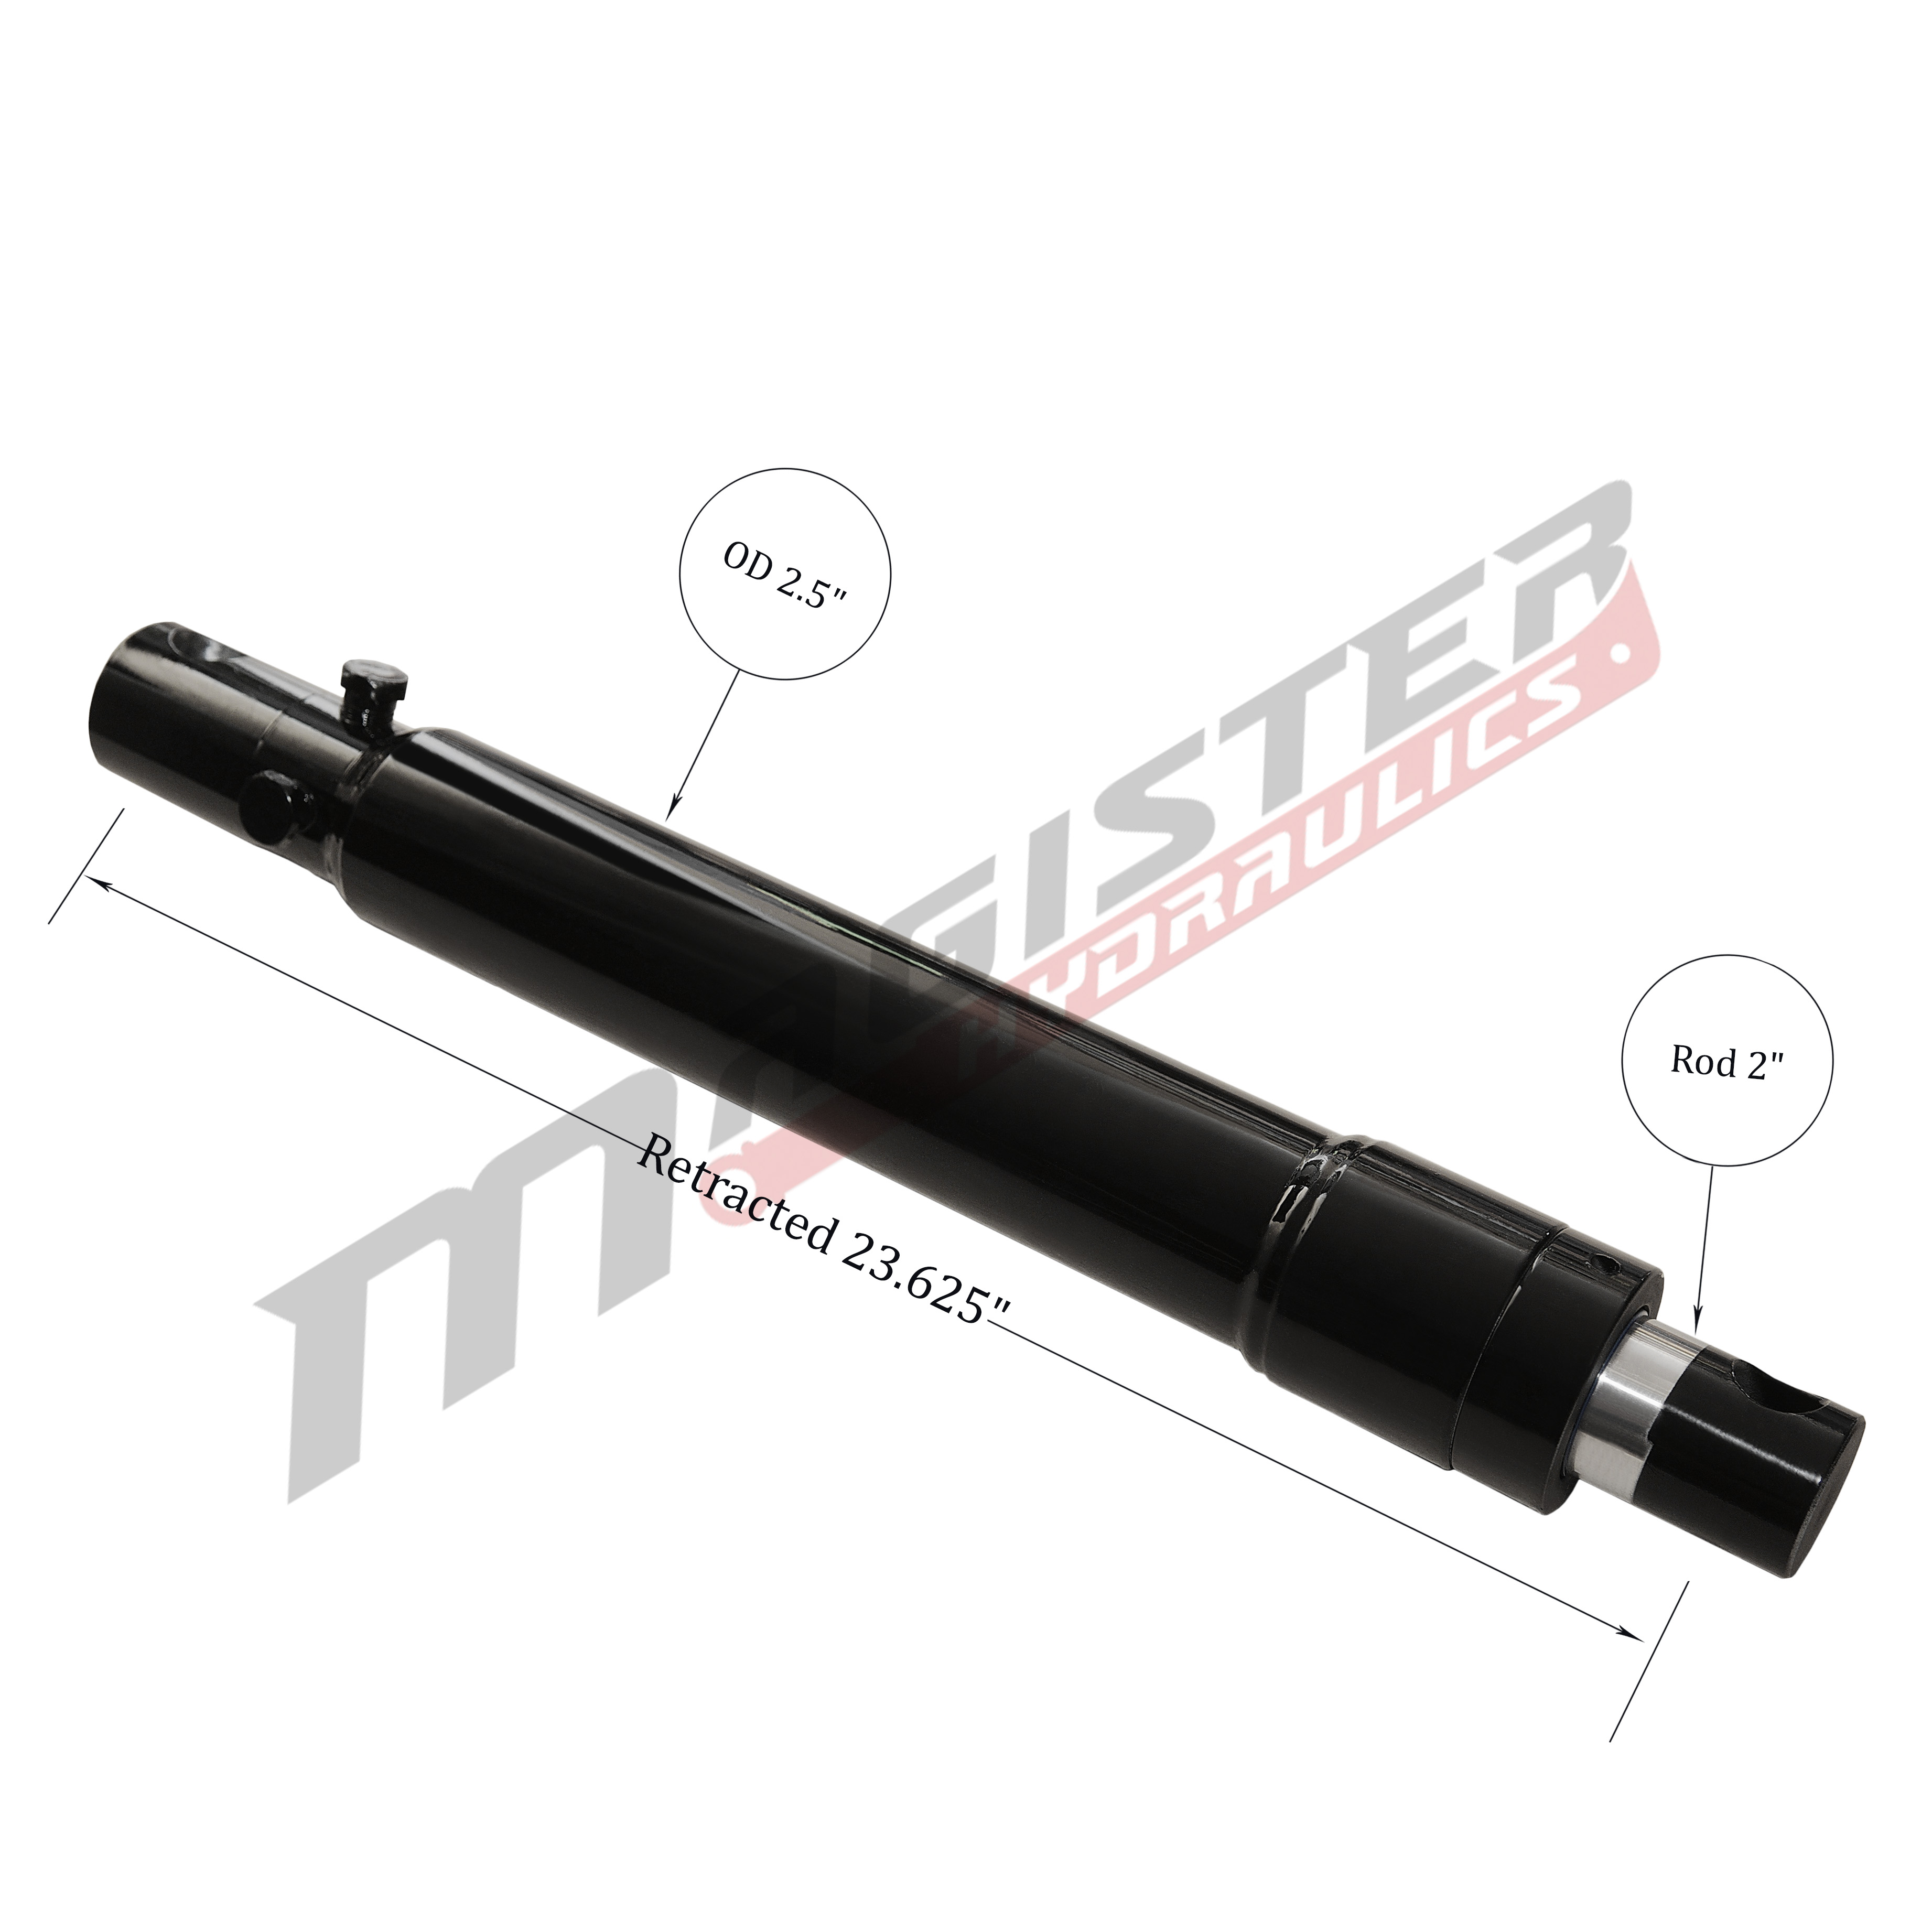 2 Bore Replacement Snow Plow Cylinder Fits Western Plow Brand New 16 Stroke 